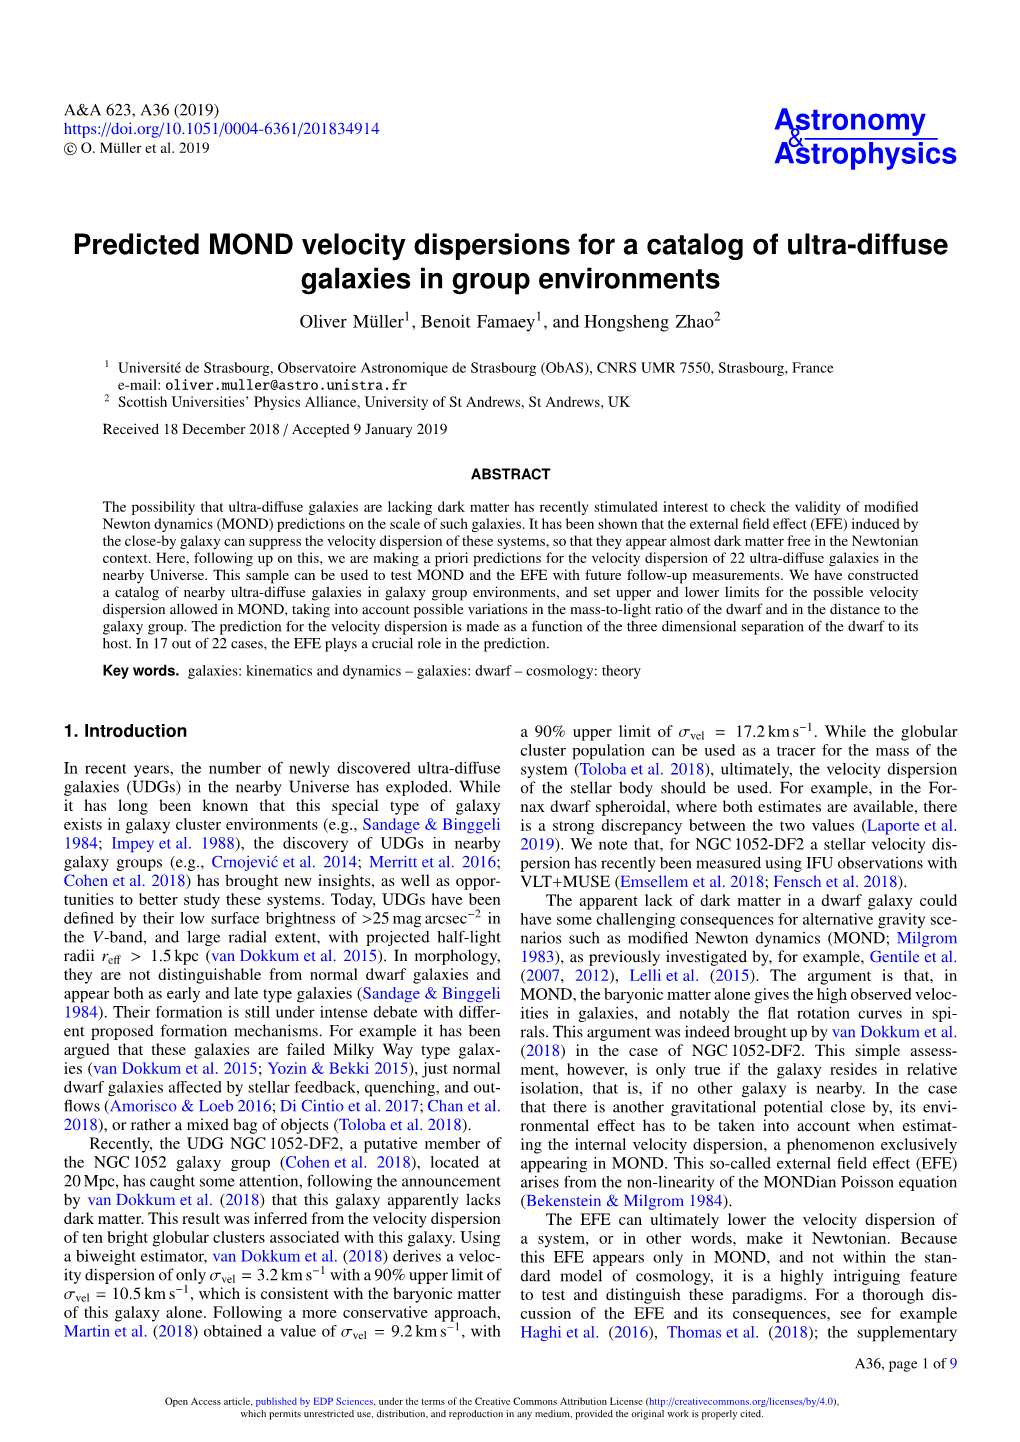 Predicted MOND Velocity Dispersions for a Catalog of Ultra-Diffuse Galaxies in Group Environments Oliver Müller1, Benoit Famaey1, and Hongsheng Zhao2